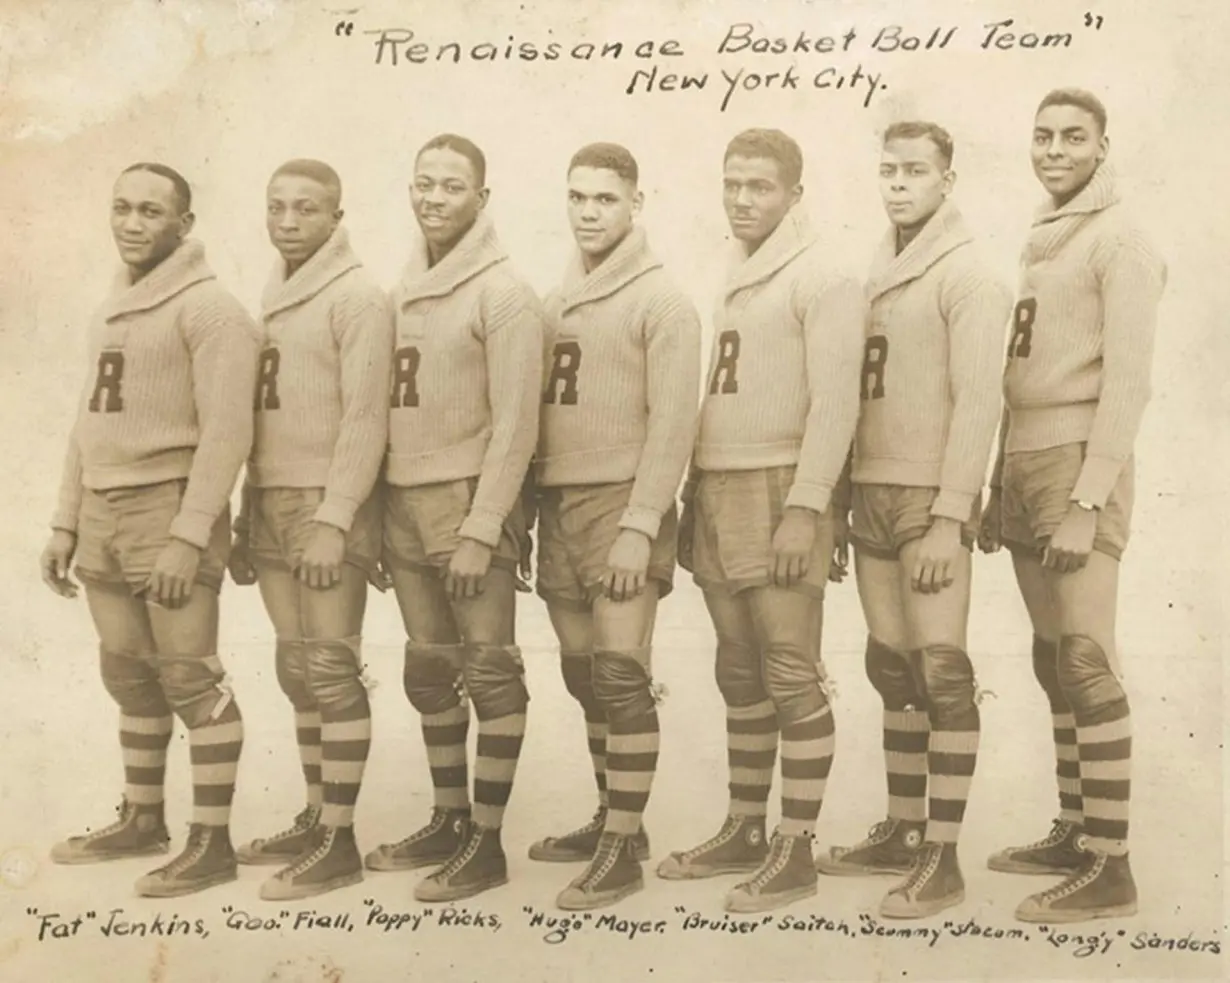 LA Post: A century ago, a Black-owned team ruled basketball − today, no Black majority owners remain